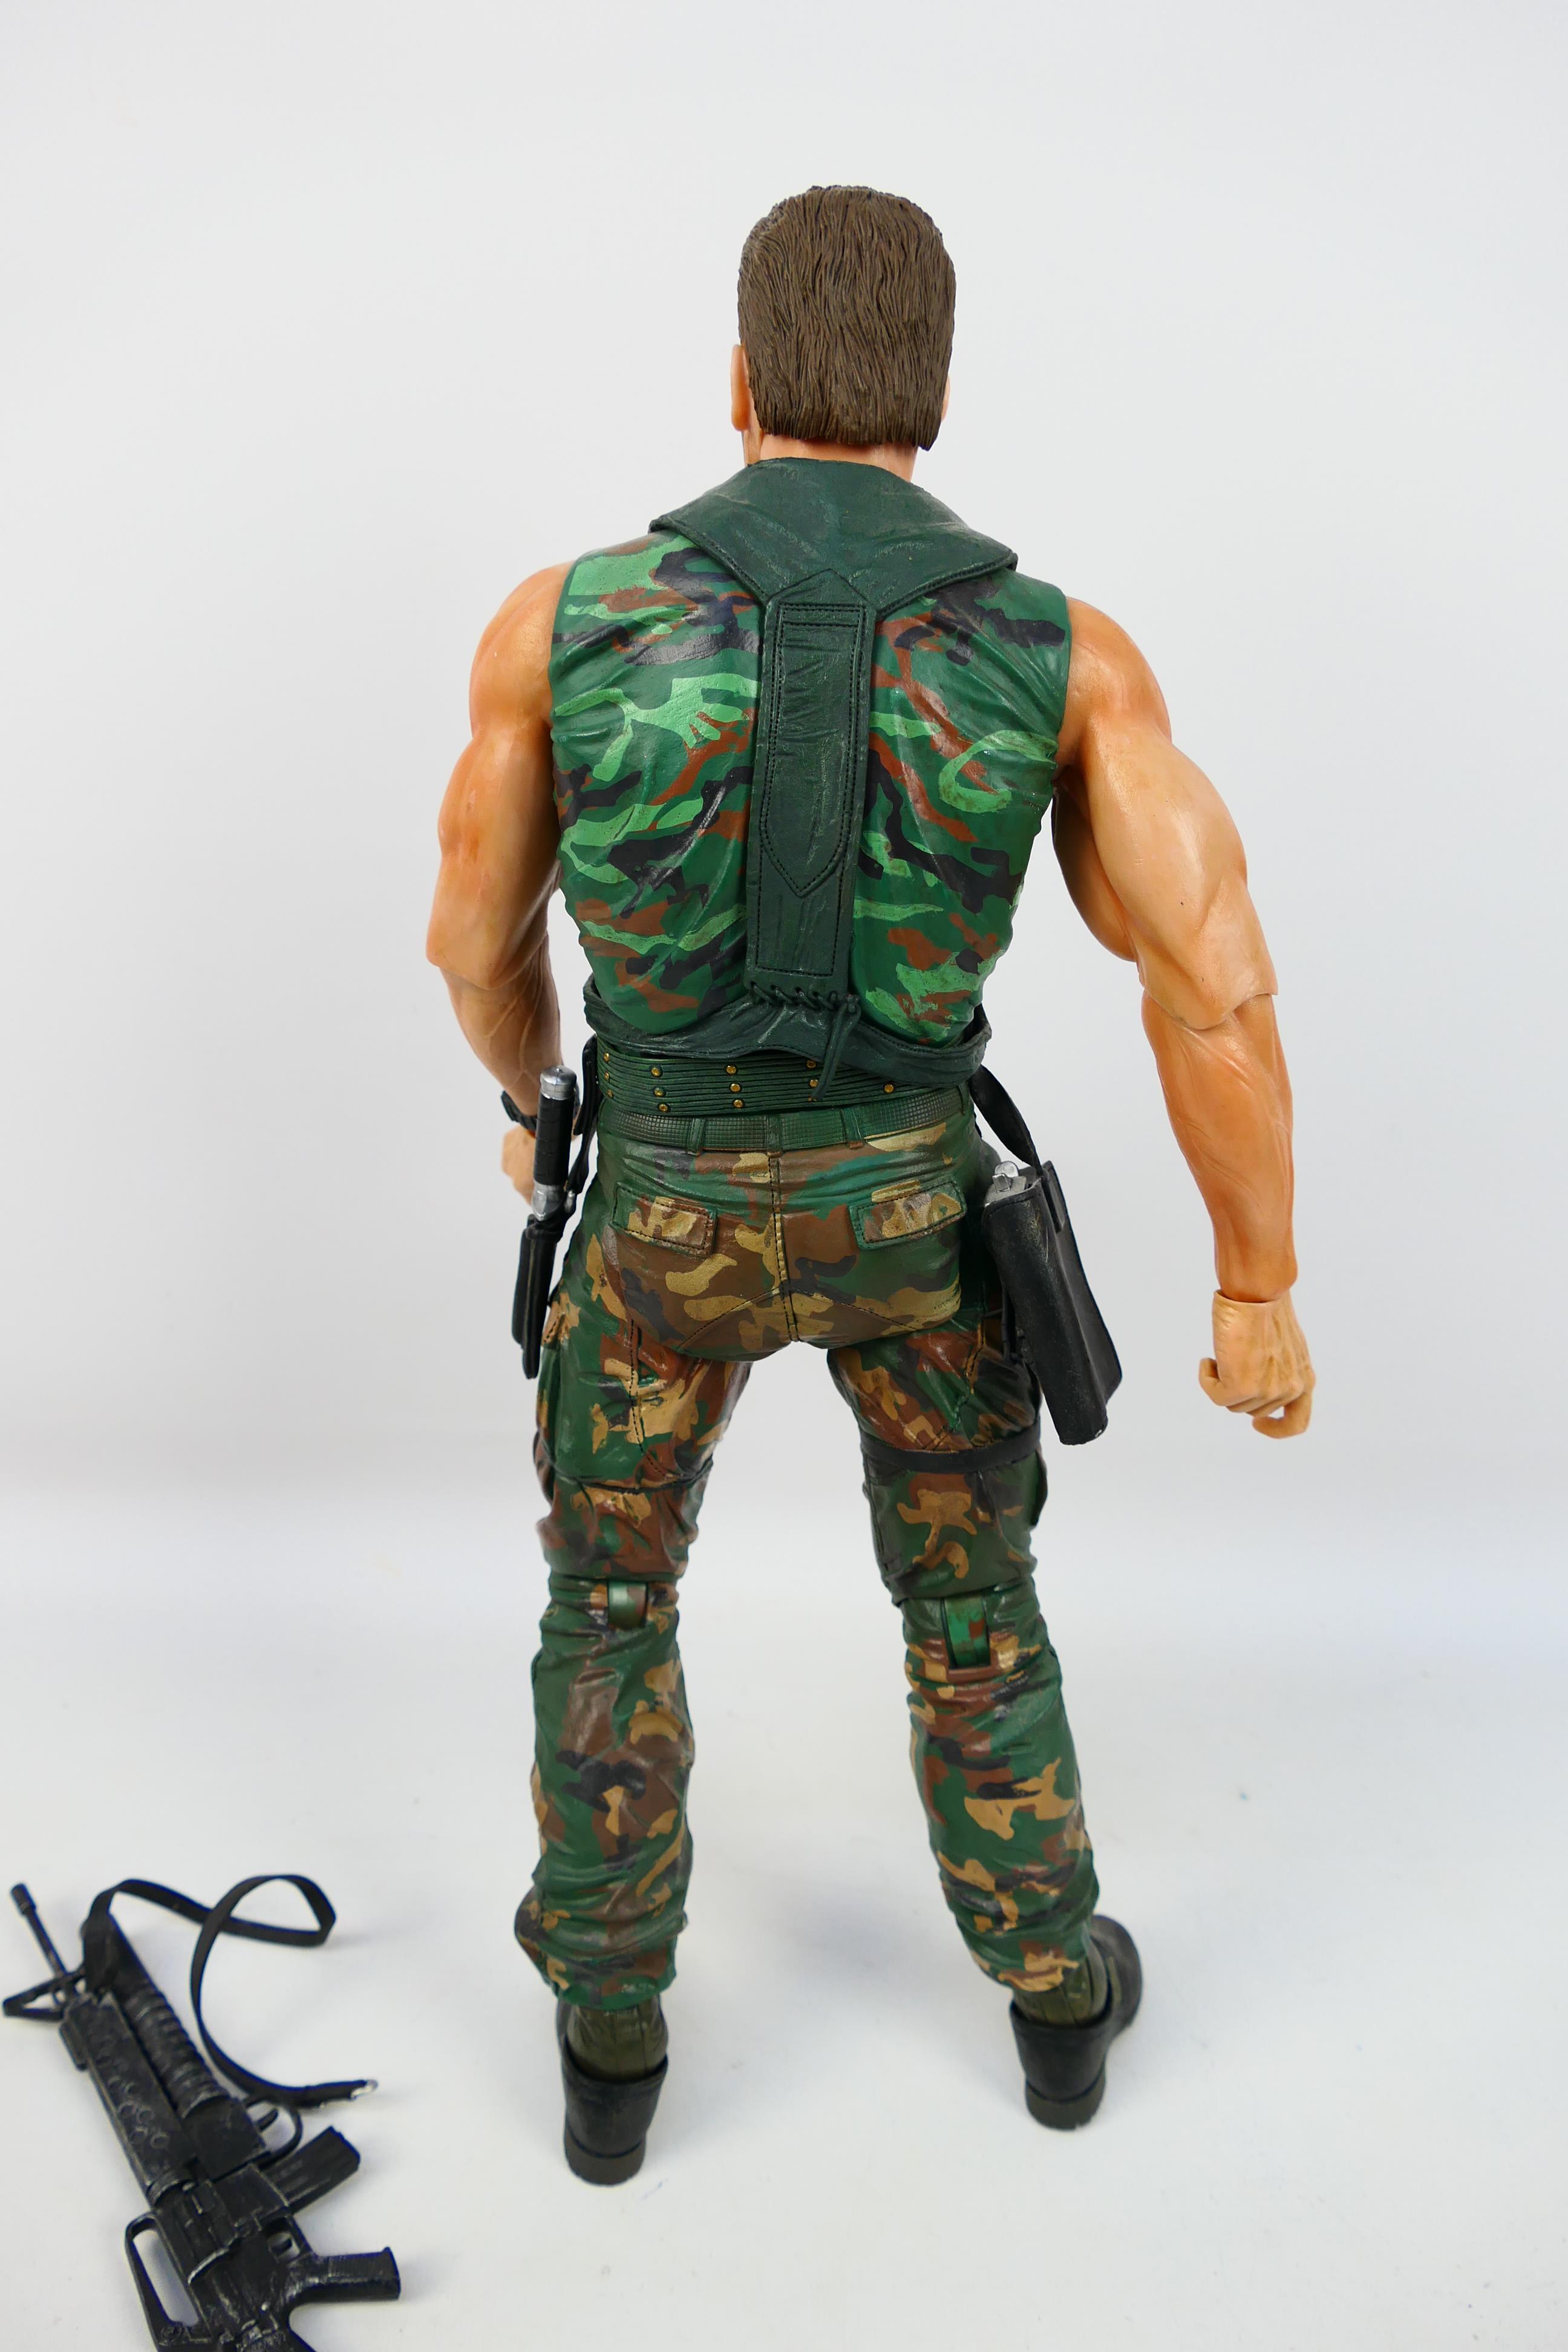 NECA - A 1:4 scale Dutch Action Figure (2013) based of the 1987 Predator film. - Image 6 of 8